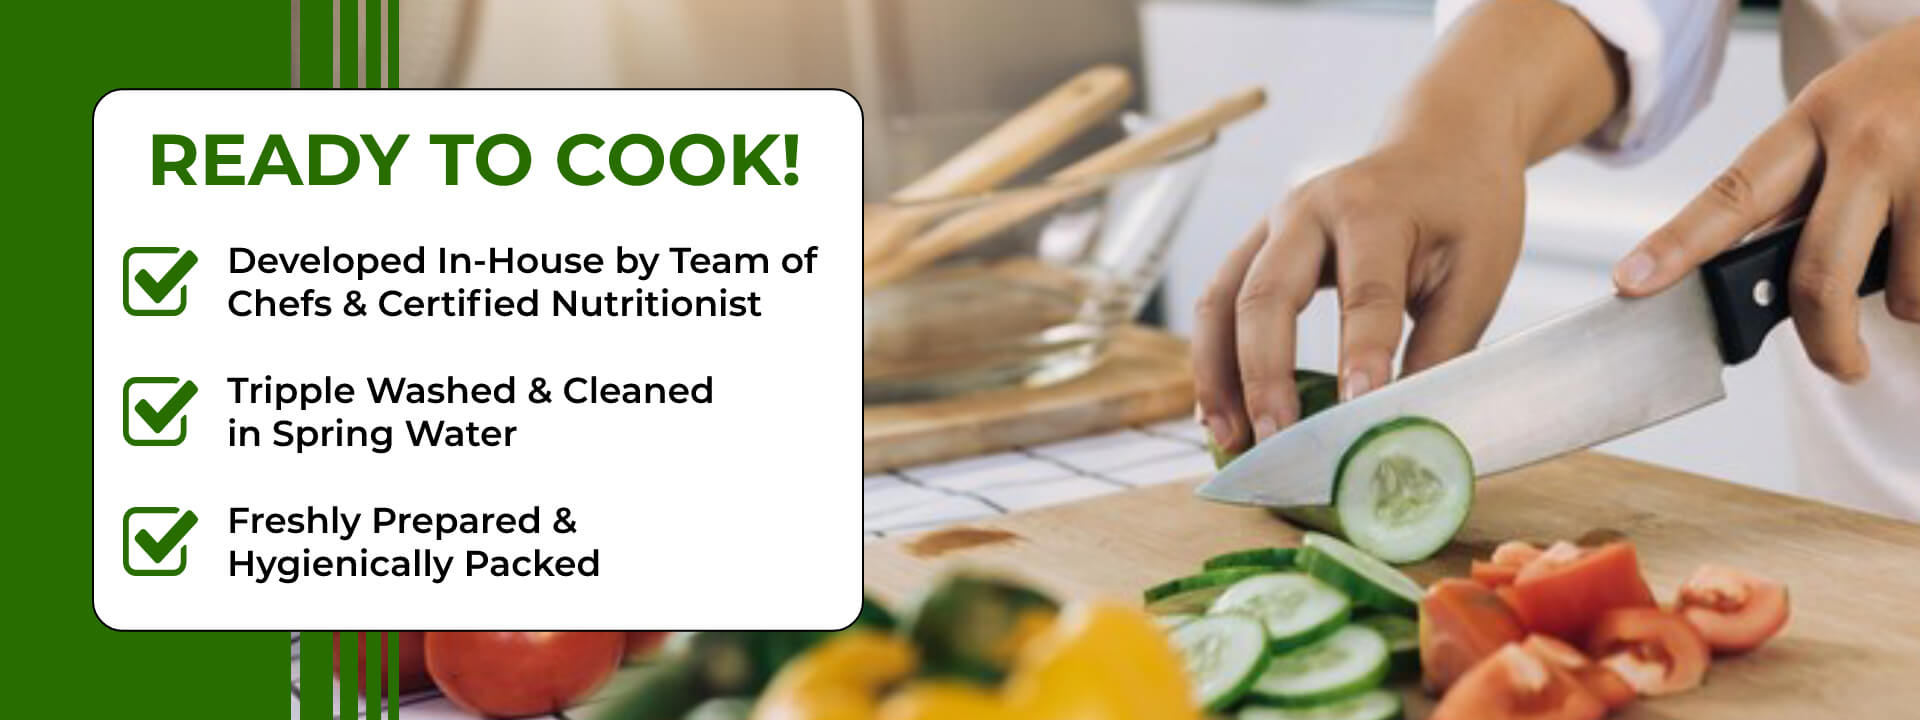 bookmysabzi - Ready to cook meals